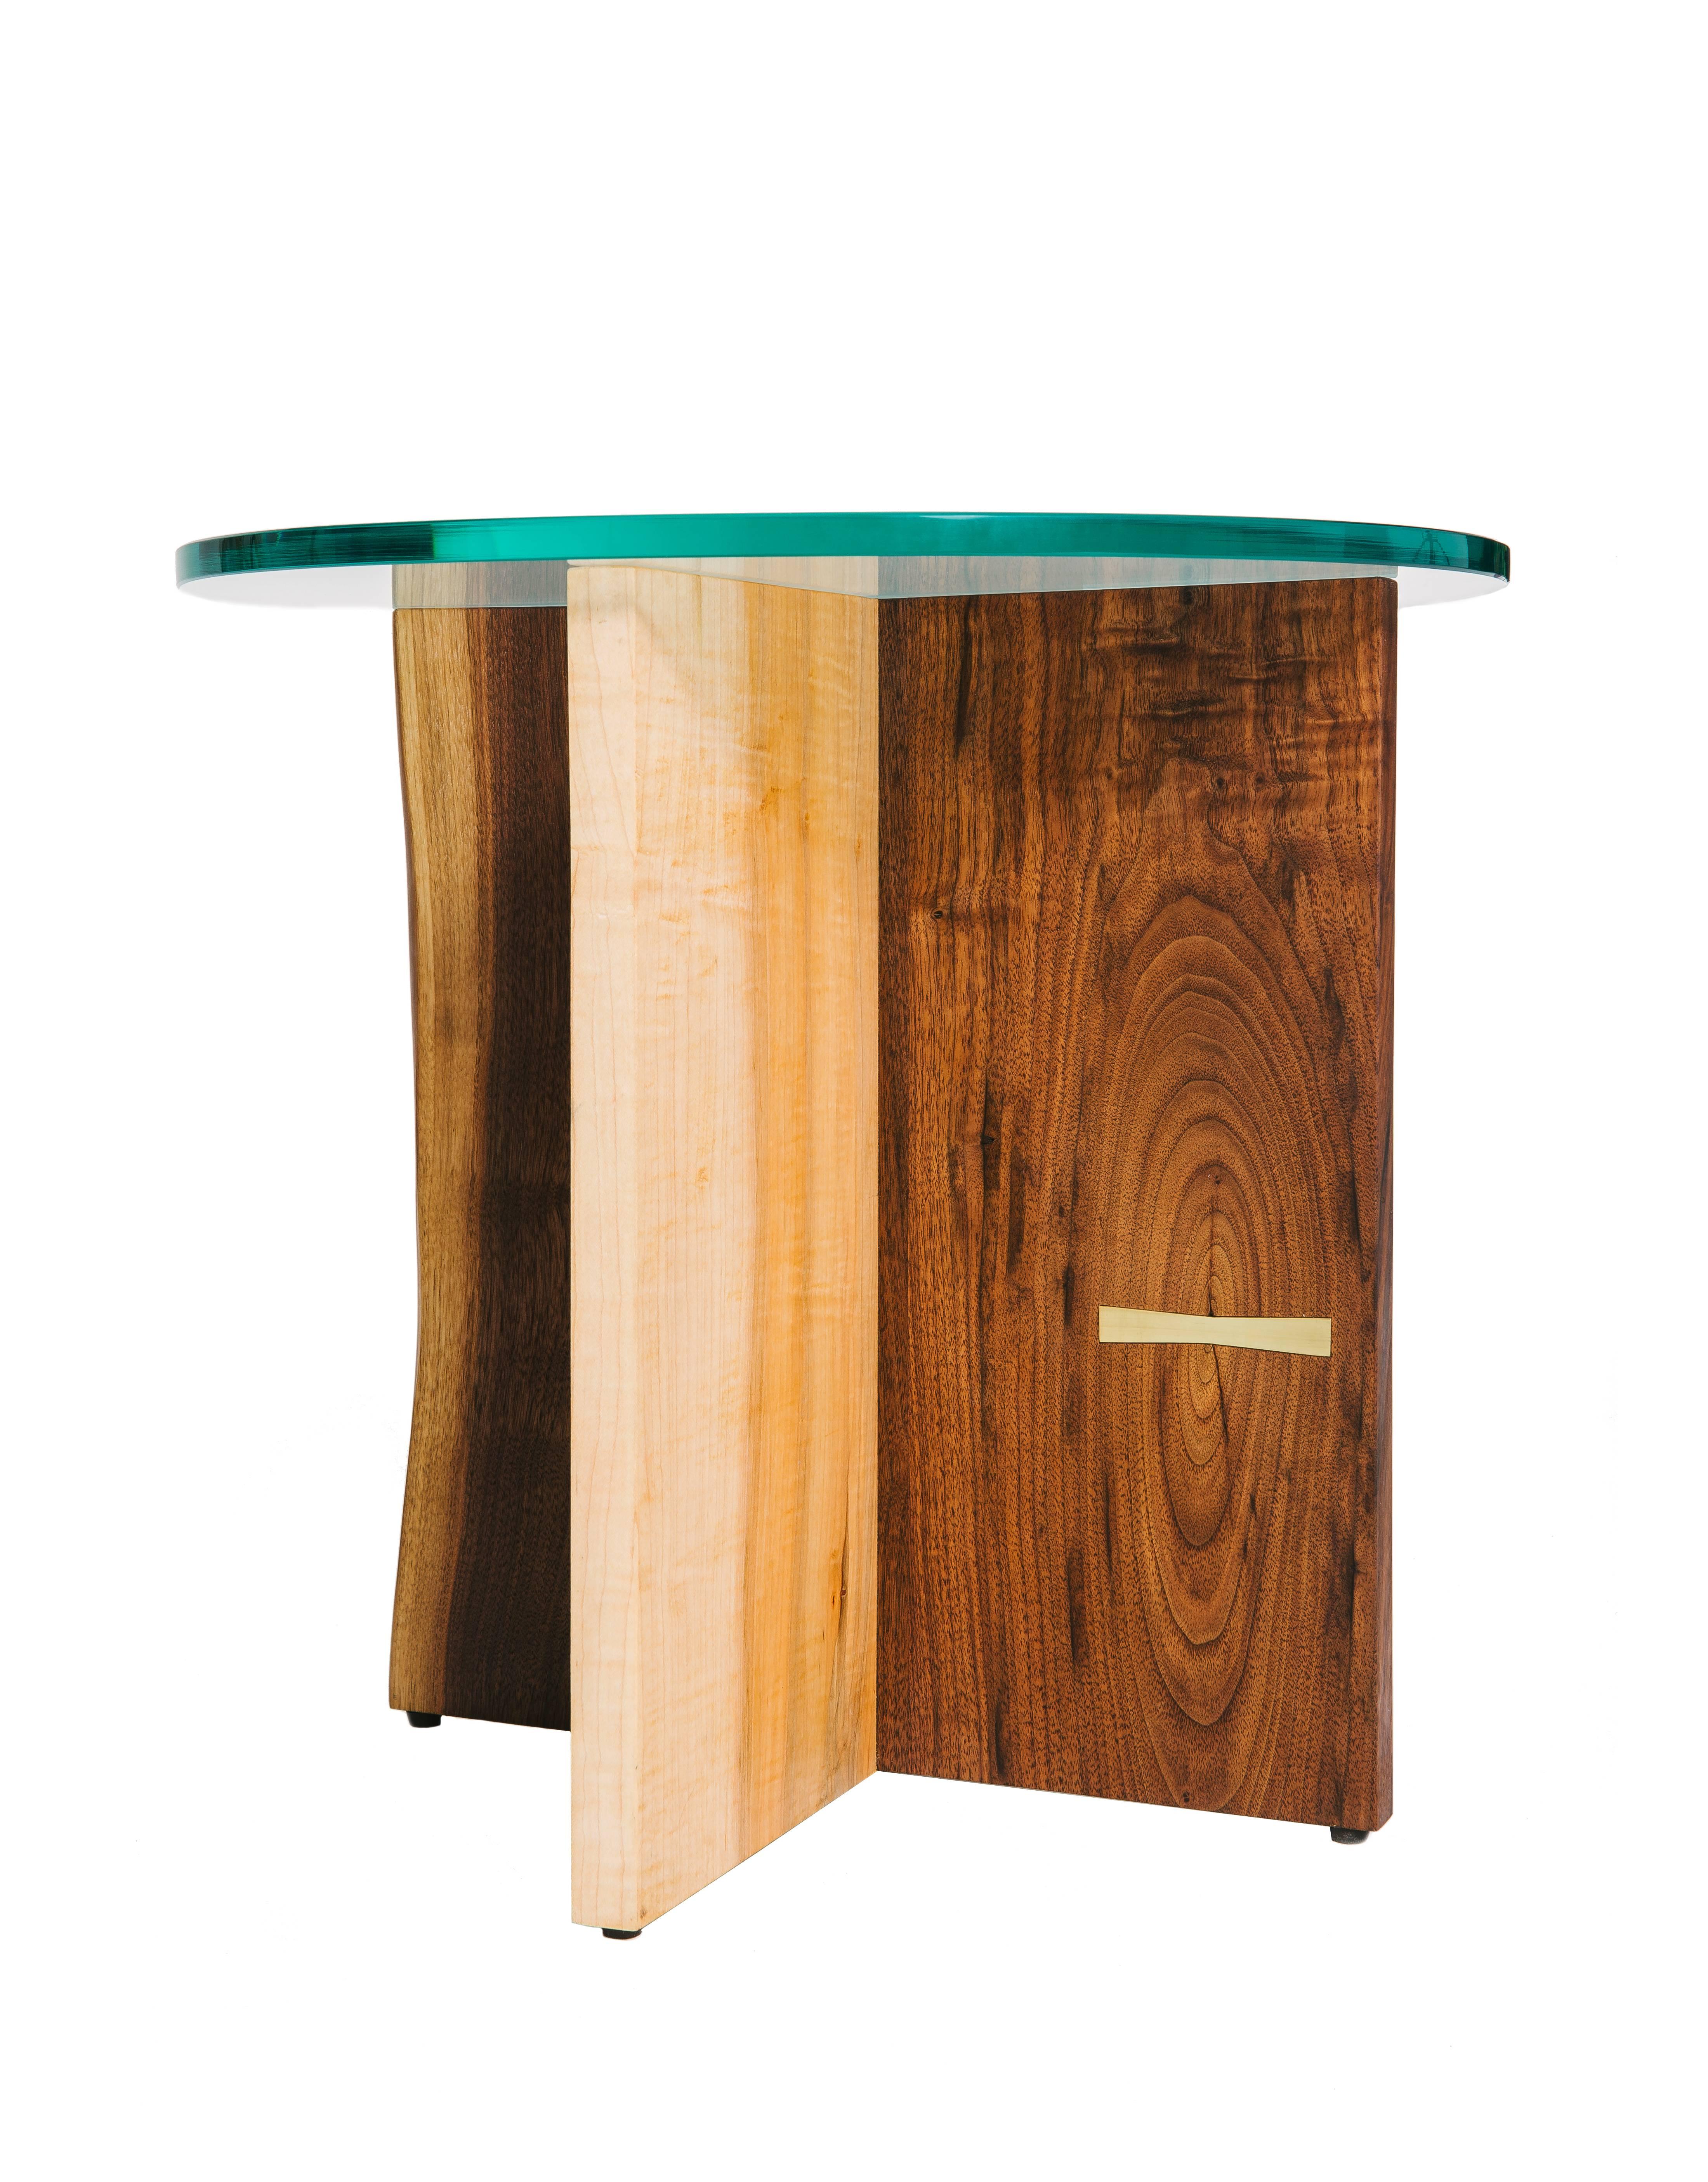 Handcrafted natural edge intersected wood slab side table base. Fine metal Dutchman joint. Polished glass top. Handmade in Los Angeles, California.

Here shown in walnut and maple with a brass Dutchman Joint, and a clear tempered glass